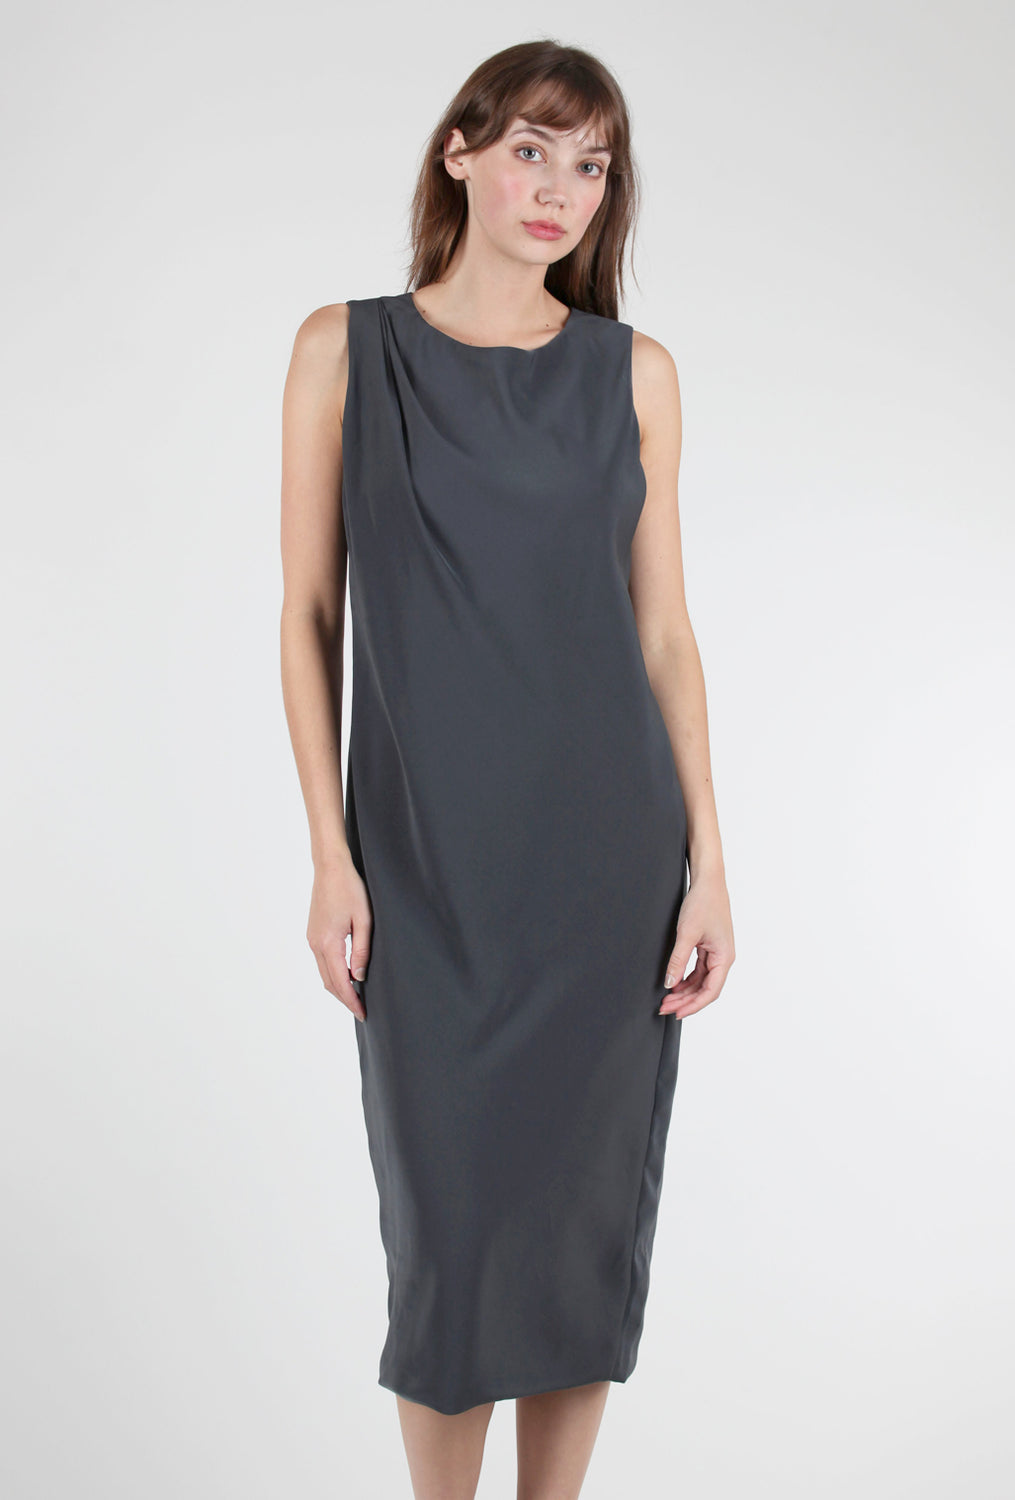 Planet Sophisticated Dress, Obsidian 